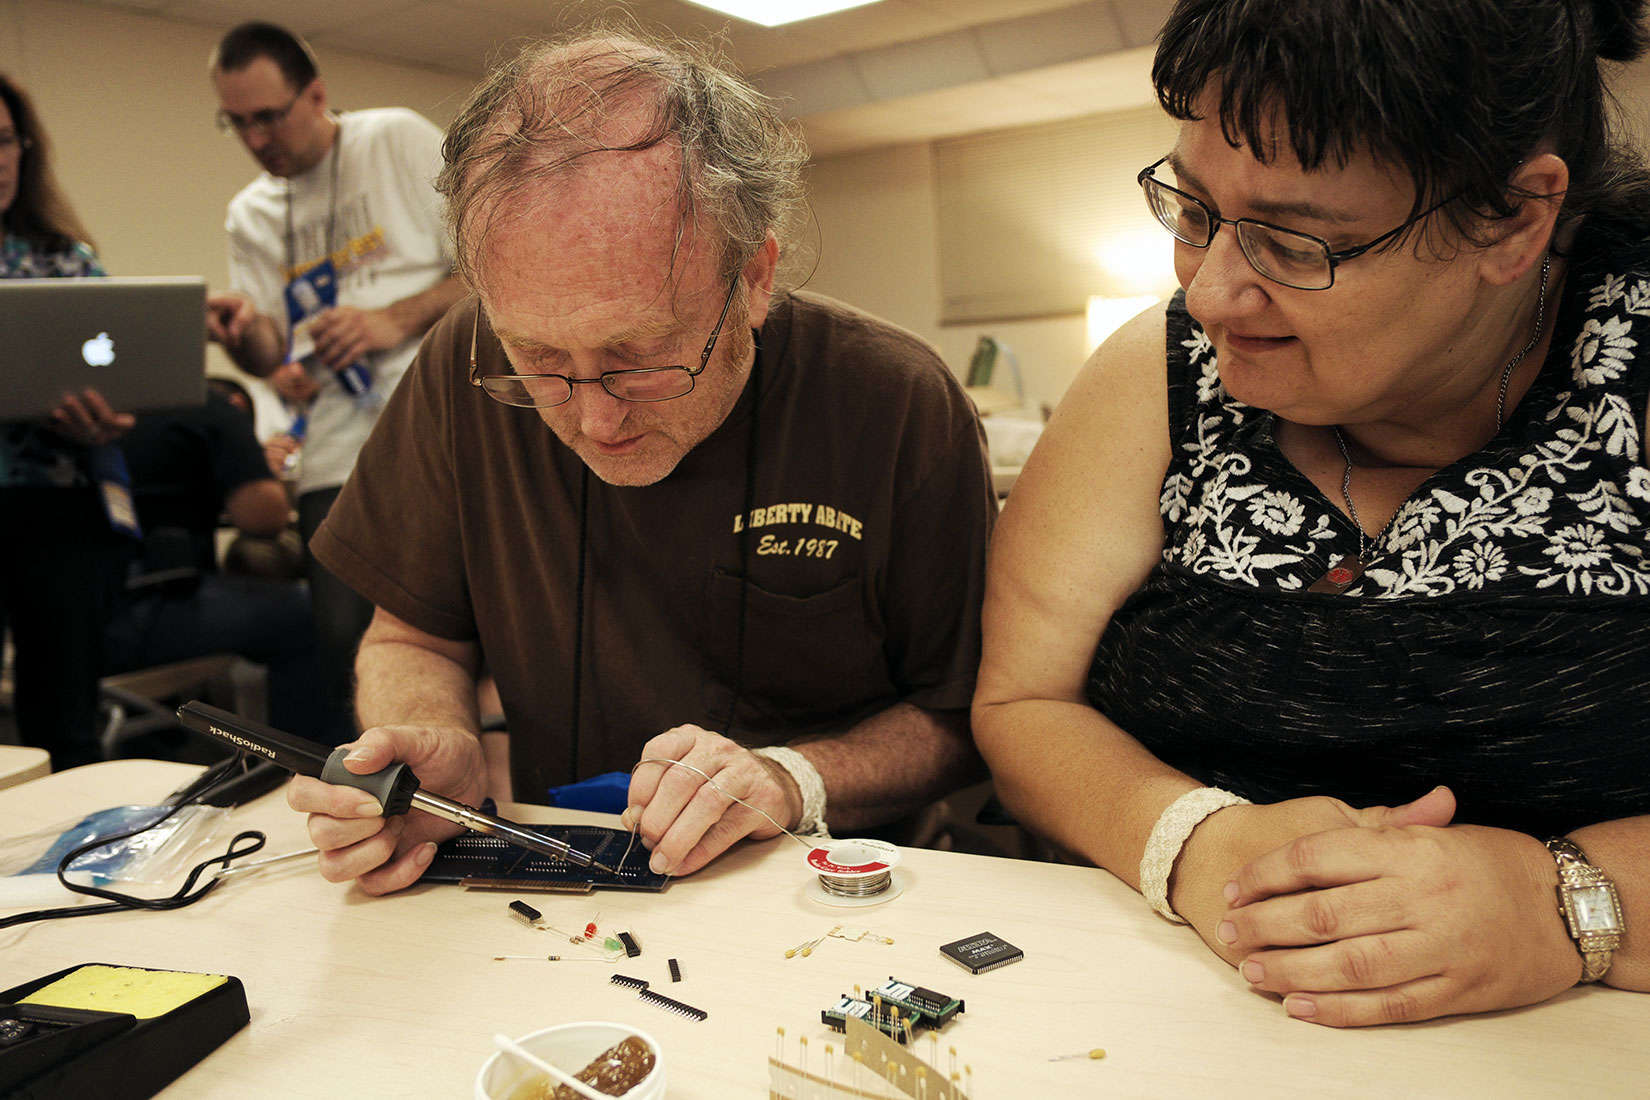 Rachele Lane watches her husband, John, try his hand at soldering at KansasFest.